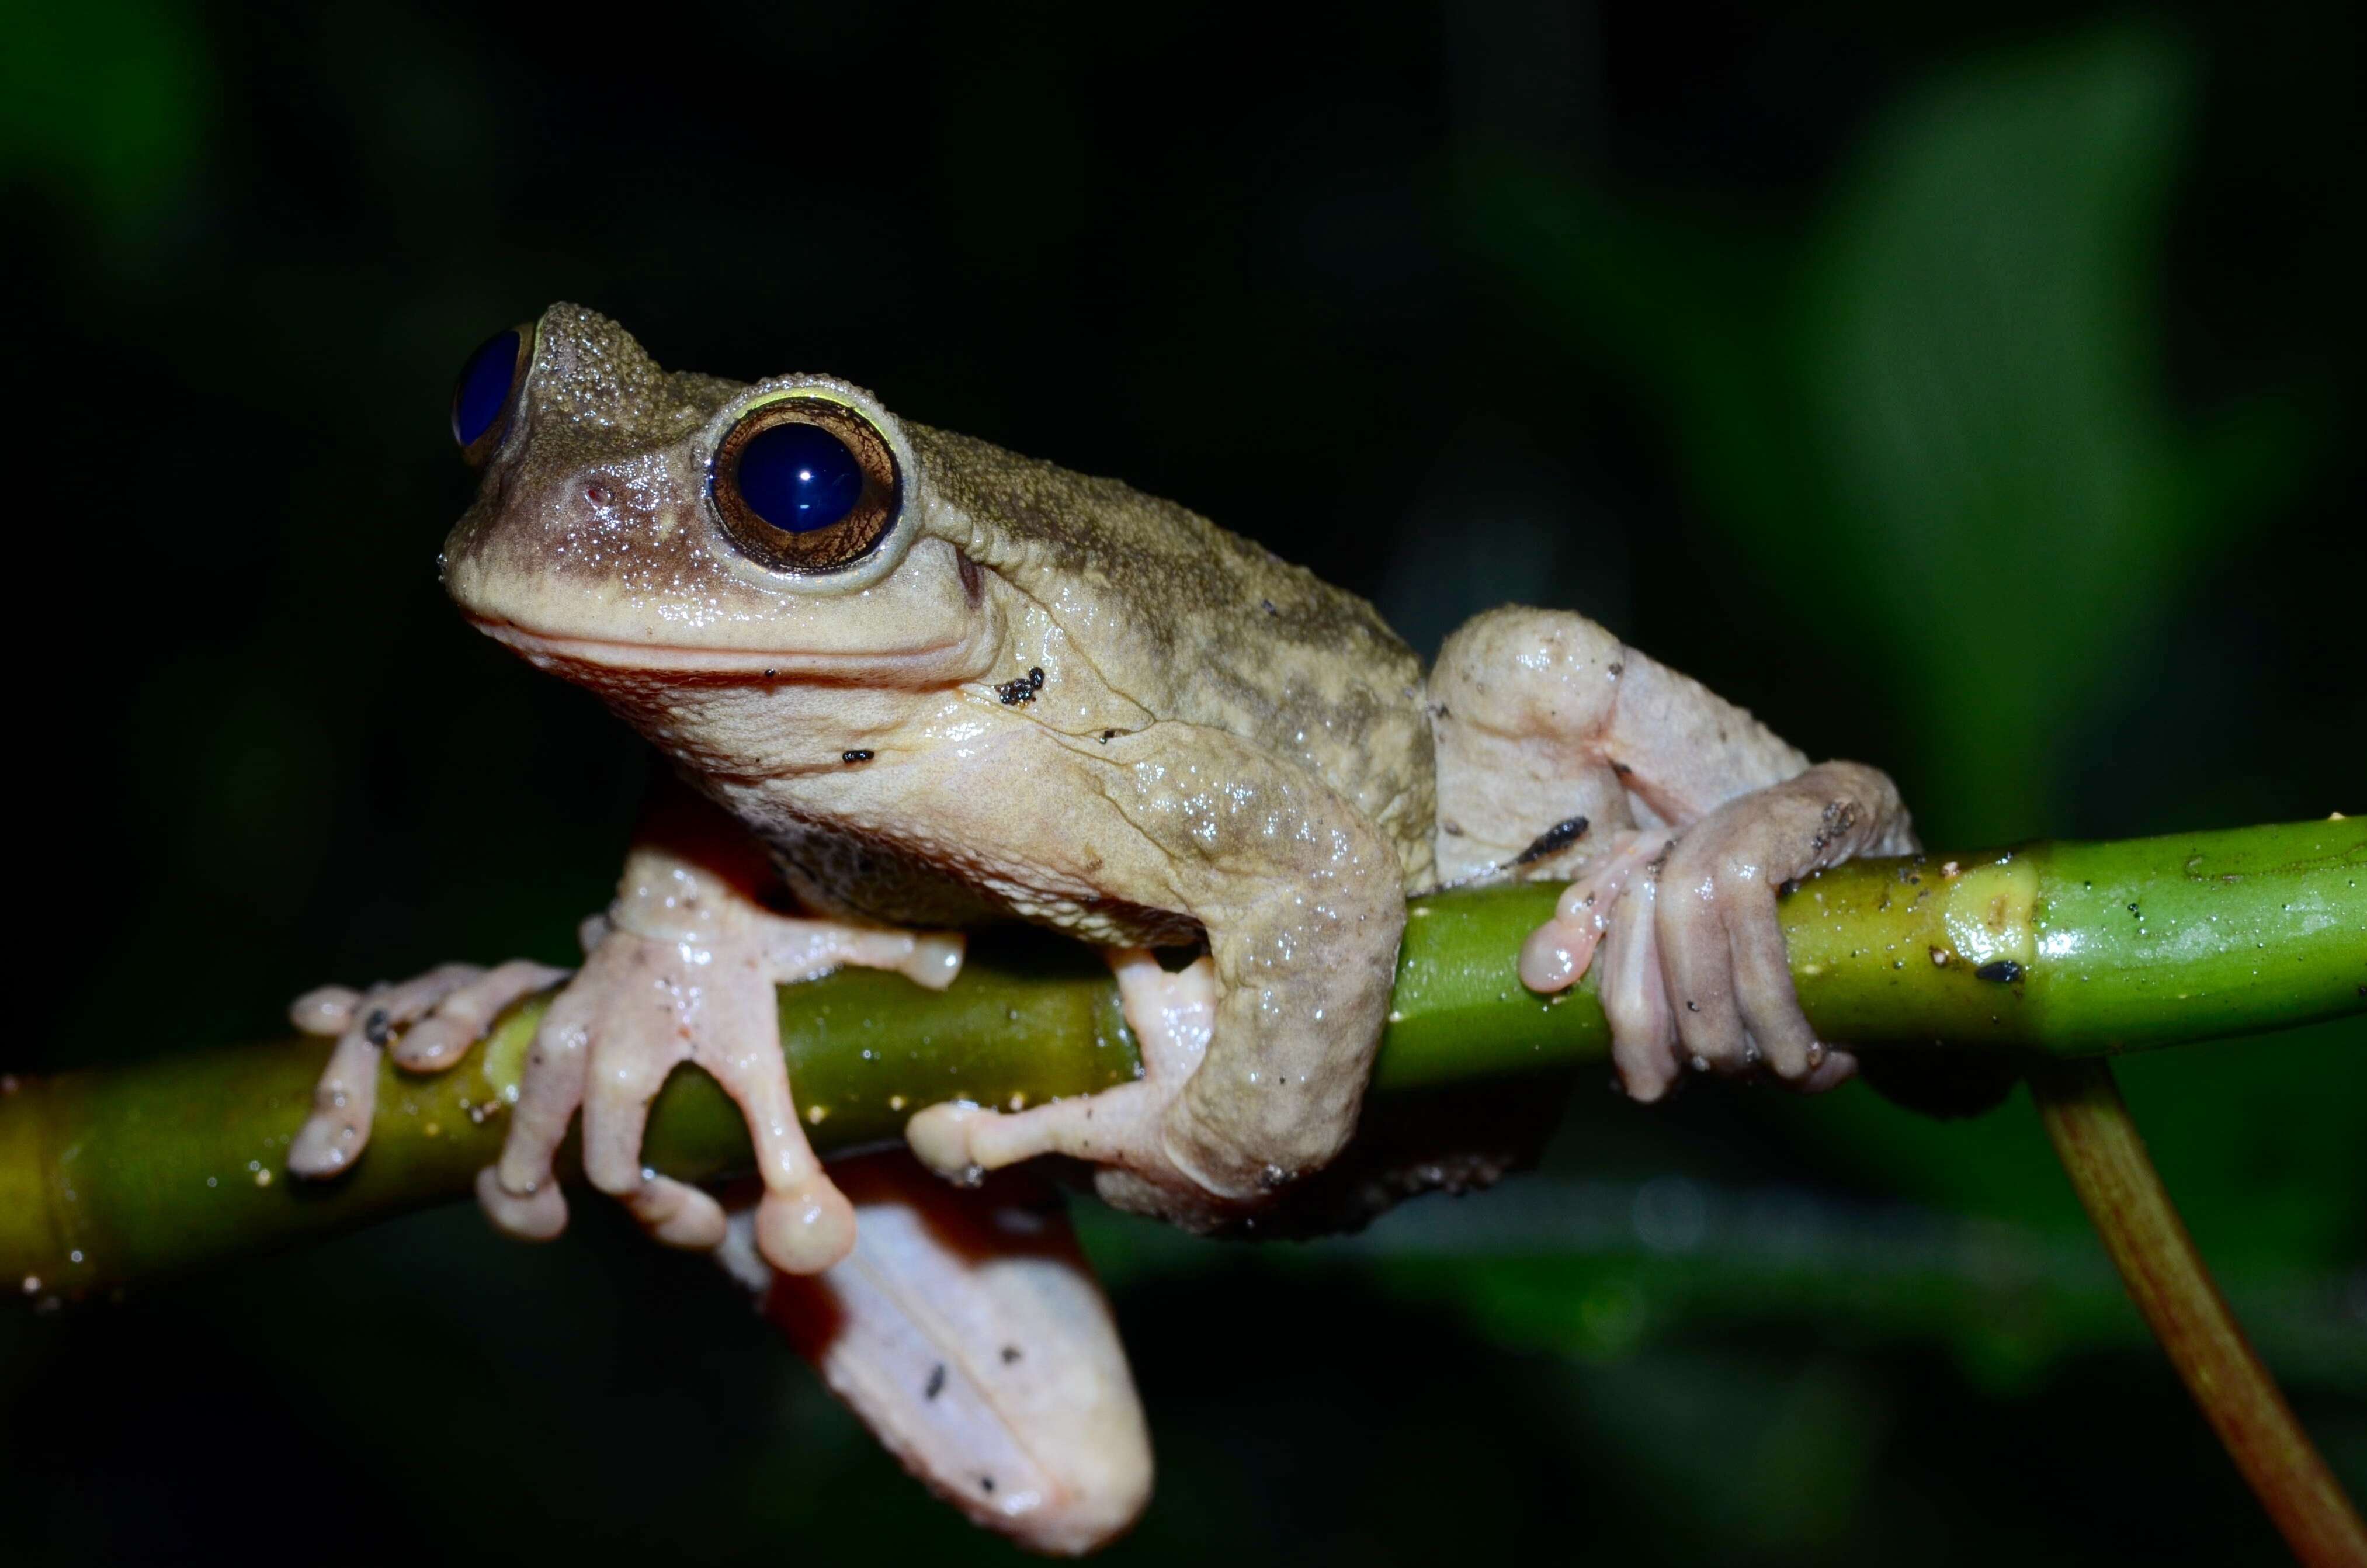 Image of Alta Verapaz spikethumb frog